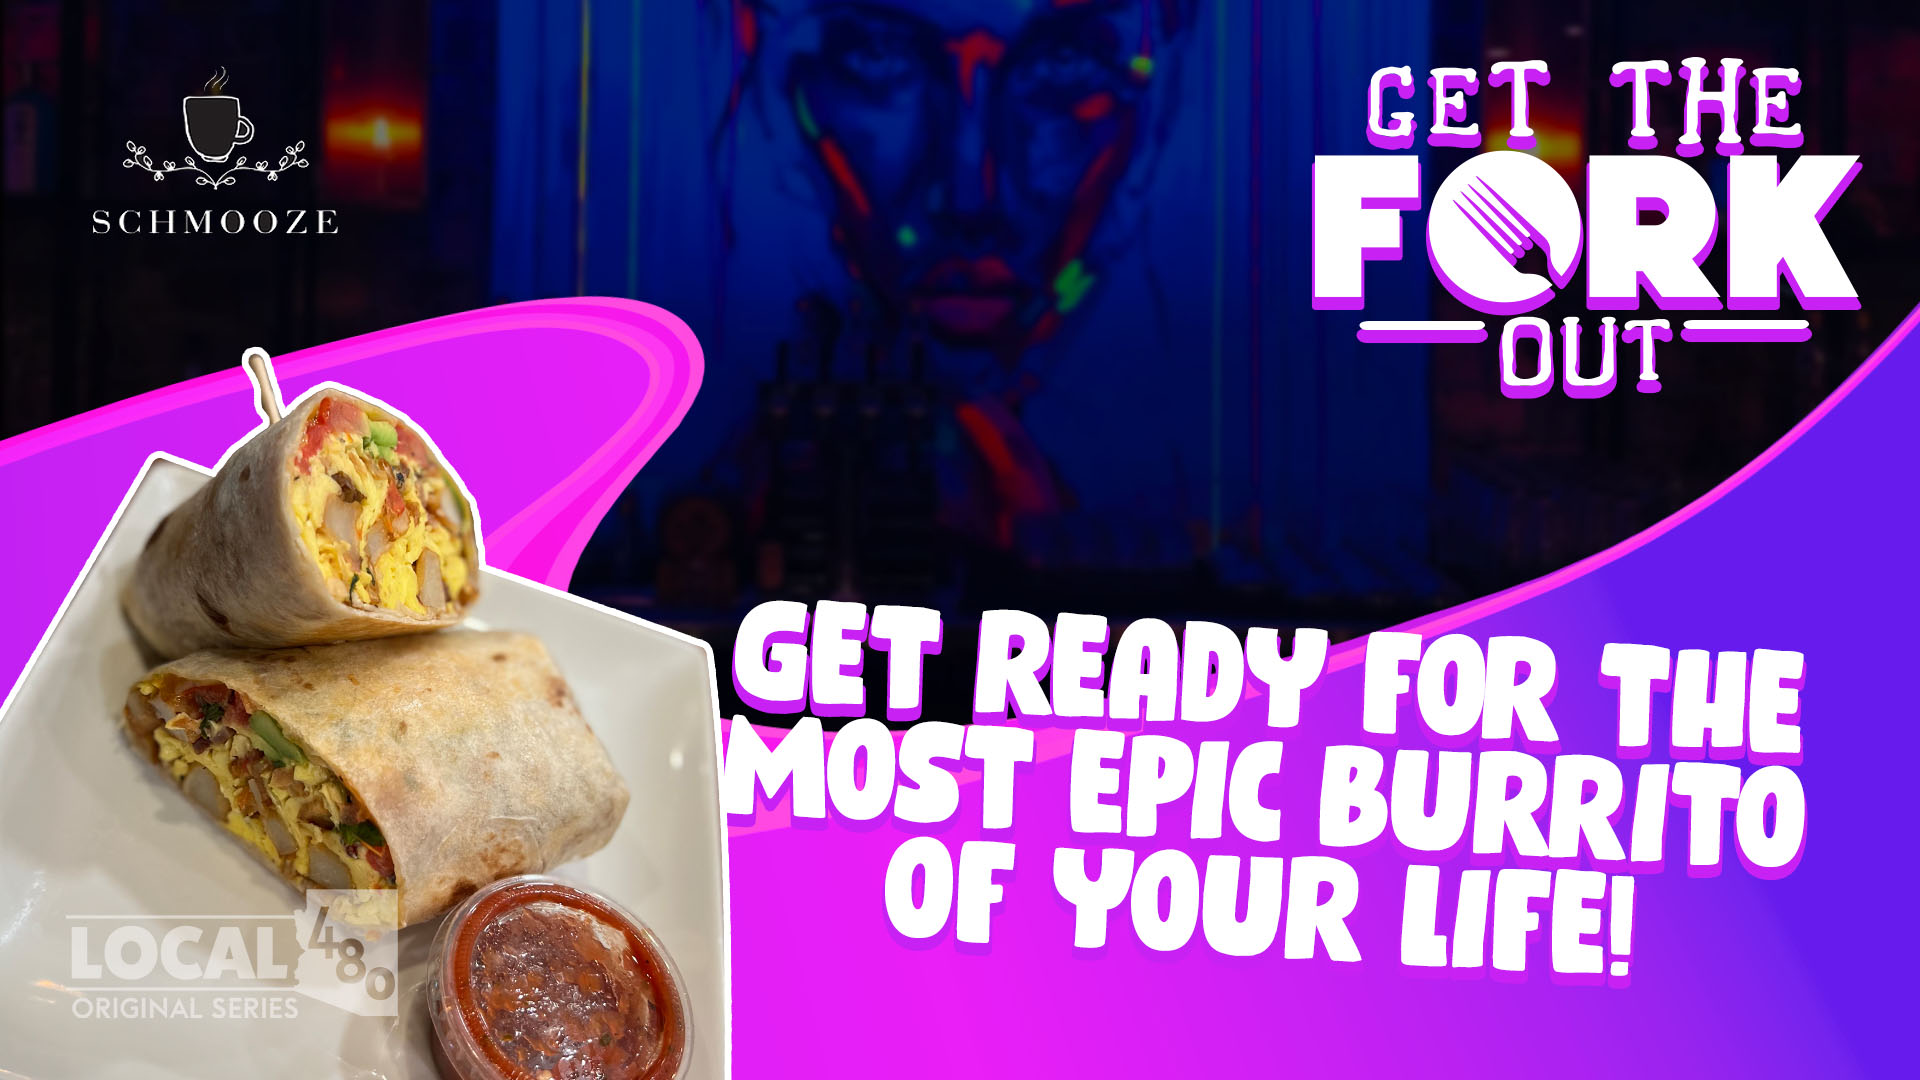 Get Ready For The Most Epic Burrito Of Your Life!